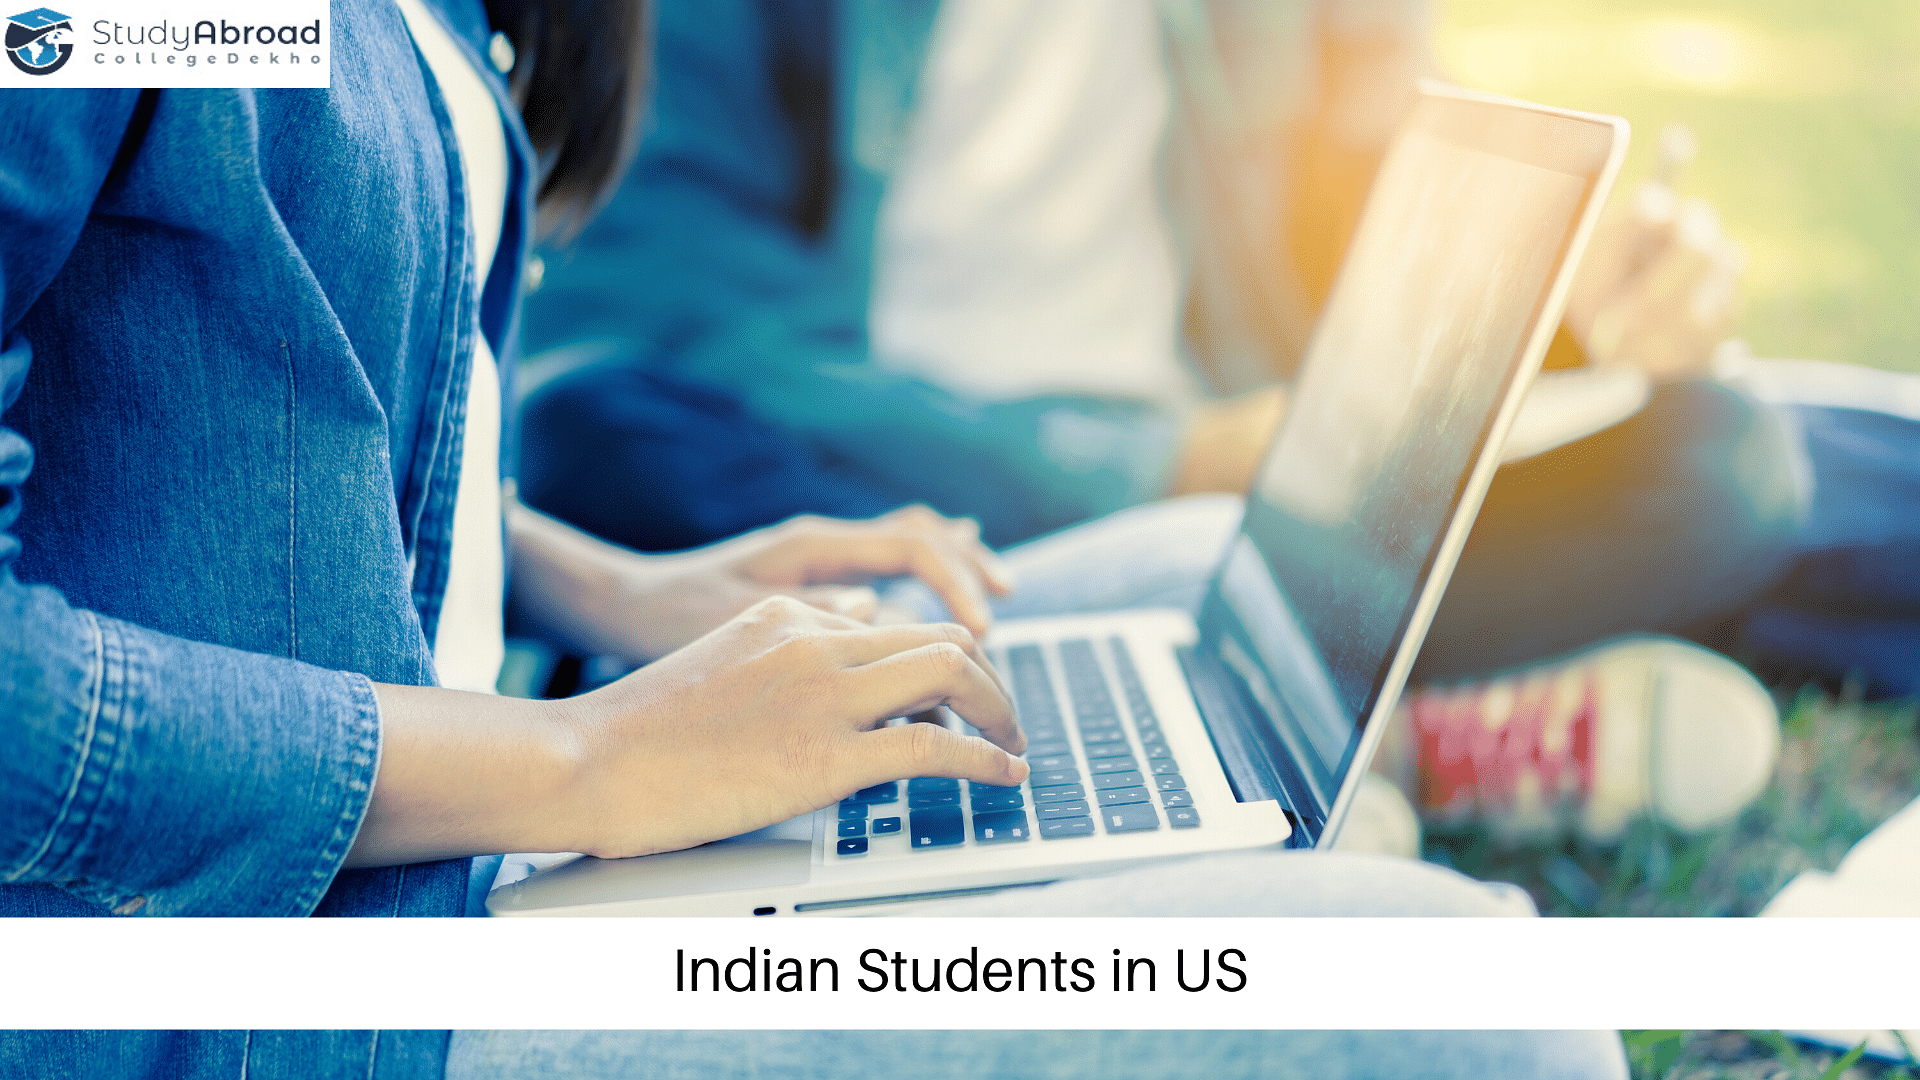 Indian Students in the US